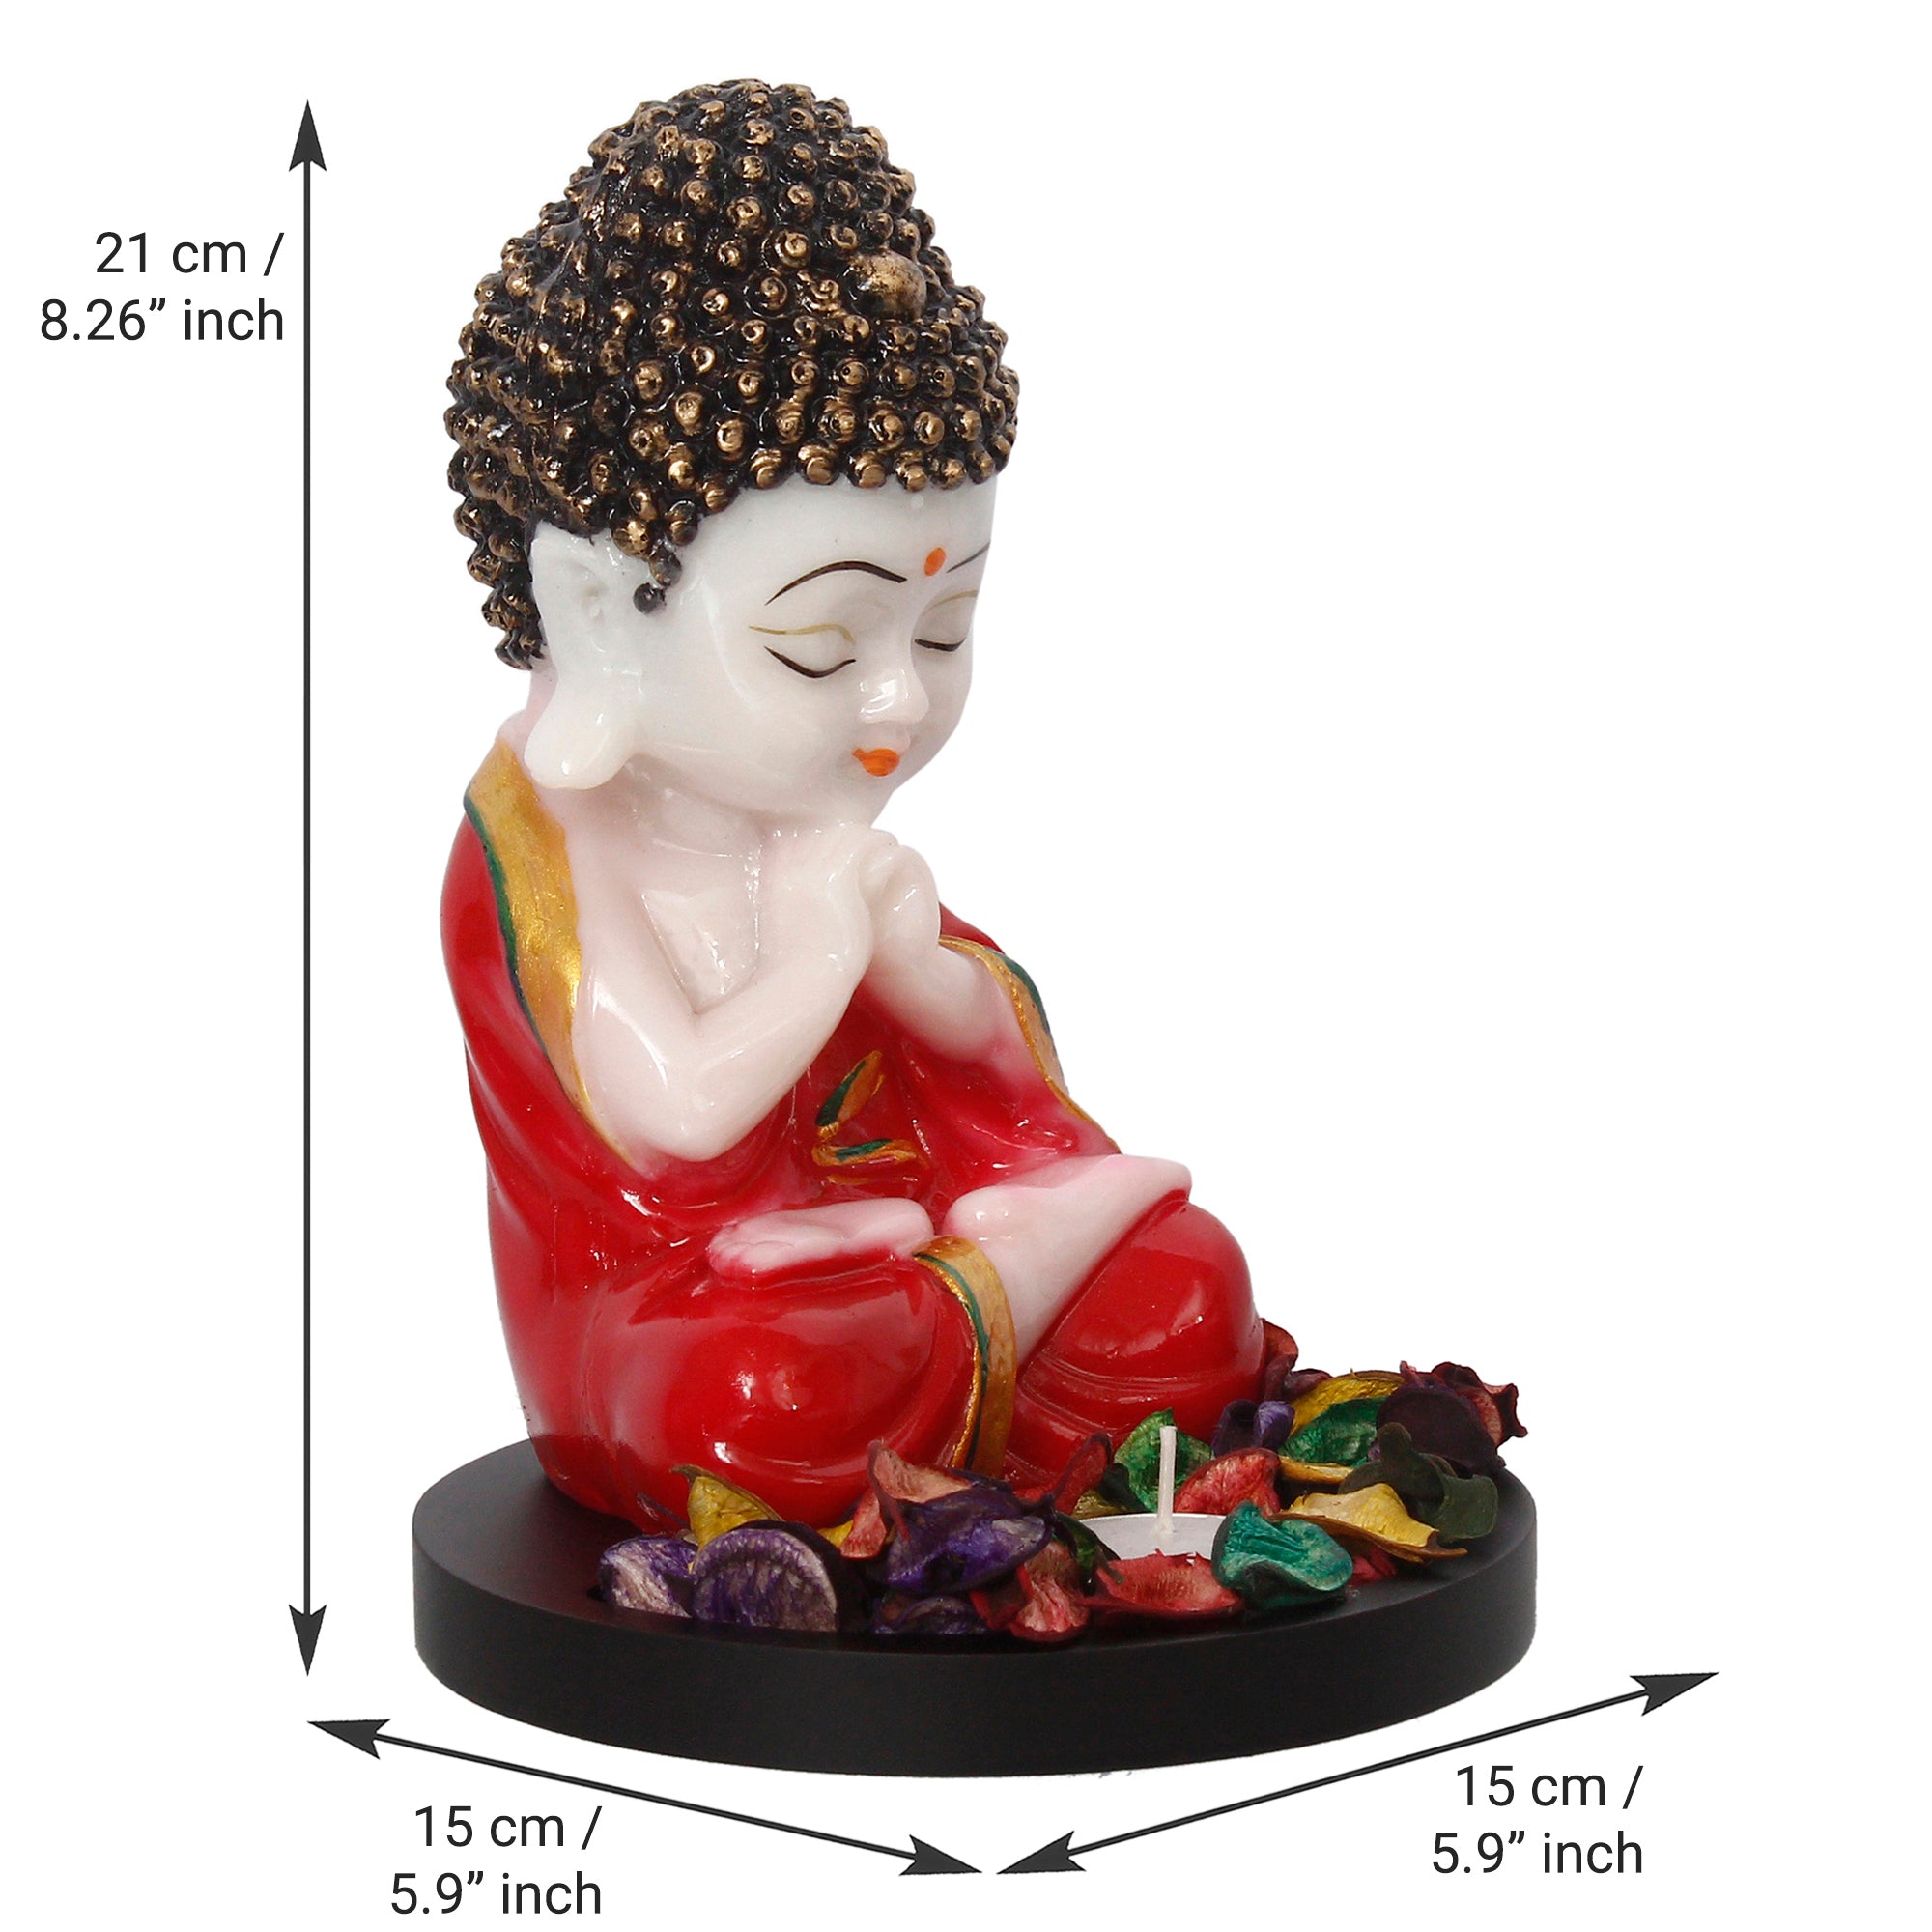 Designer Handcrafted Stone Pearl Rakhi with Praying Red Monk Buddha with Wooden Base, Fragranced Petals and Tealight and Roli Chawal Pack, Best Wishes Greeting Card 3